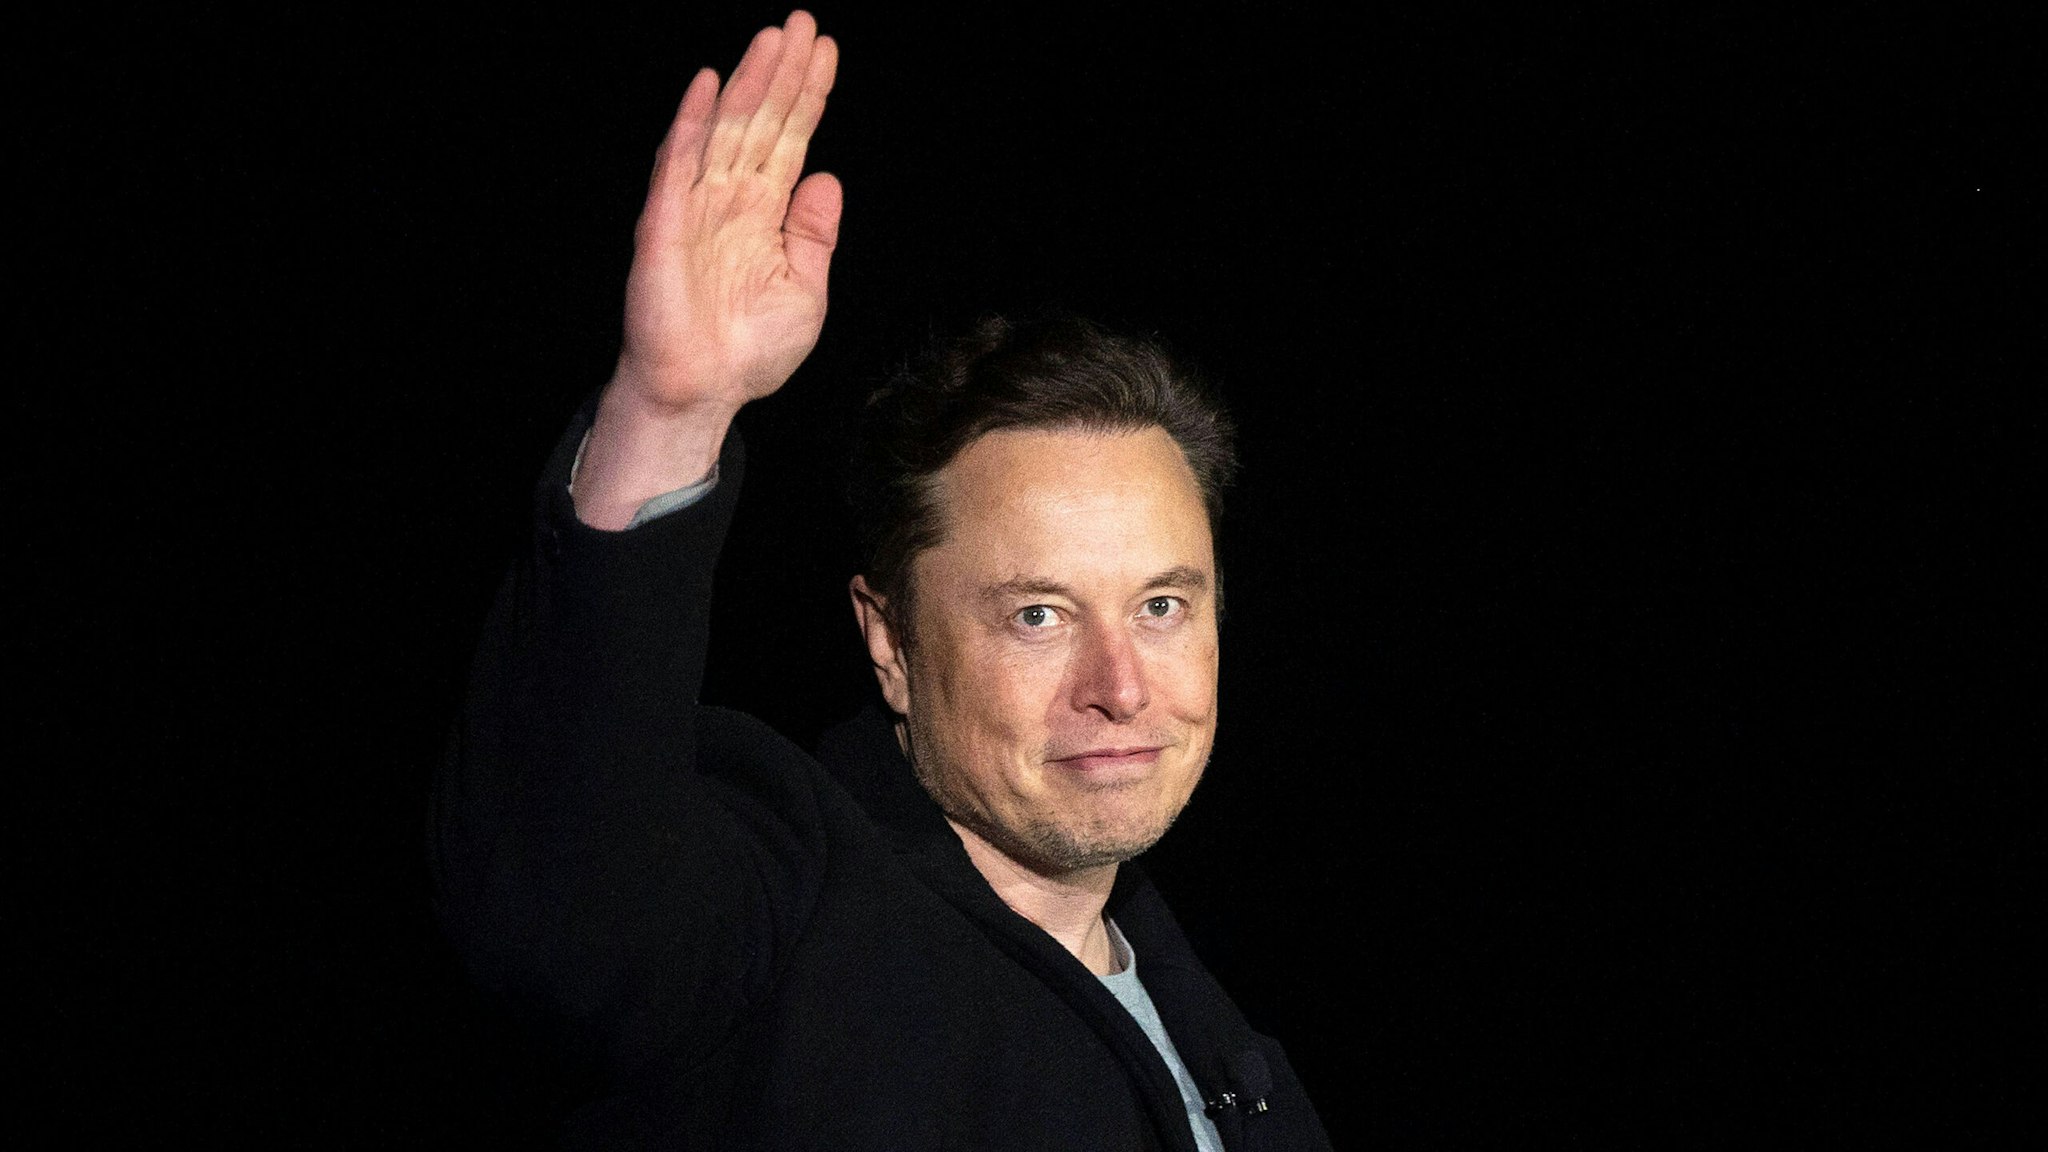 Elon Musk gestures as he speaks during a press conference at SpaceX's Starbase facility near Boca Chica Village in South Texas on February 10, 2022. - Billionaire entrepreneur Elon Musk delivered an eagerly-awaited update on SpaceX's Starship, a prototype rocket the company is developing for crewed interplanetary exploration.